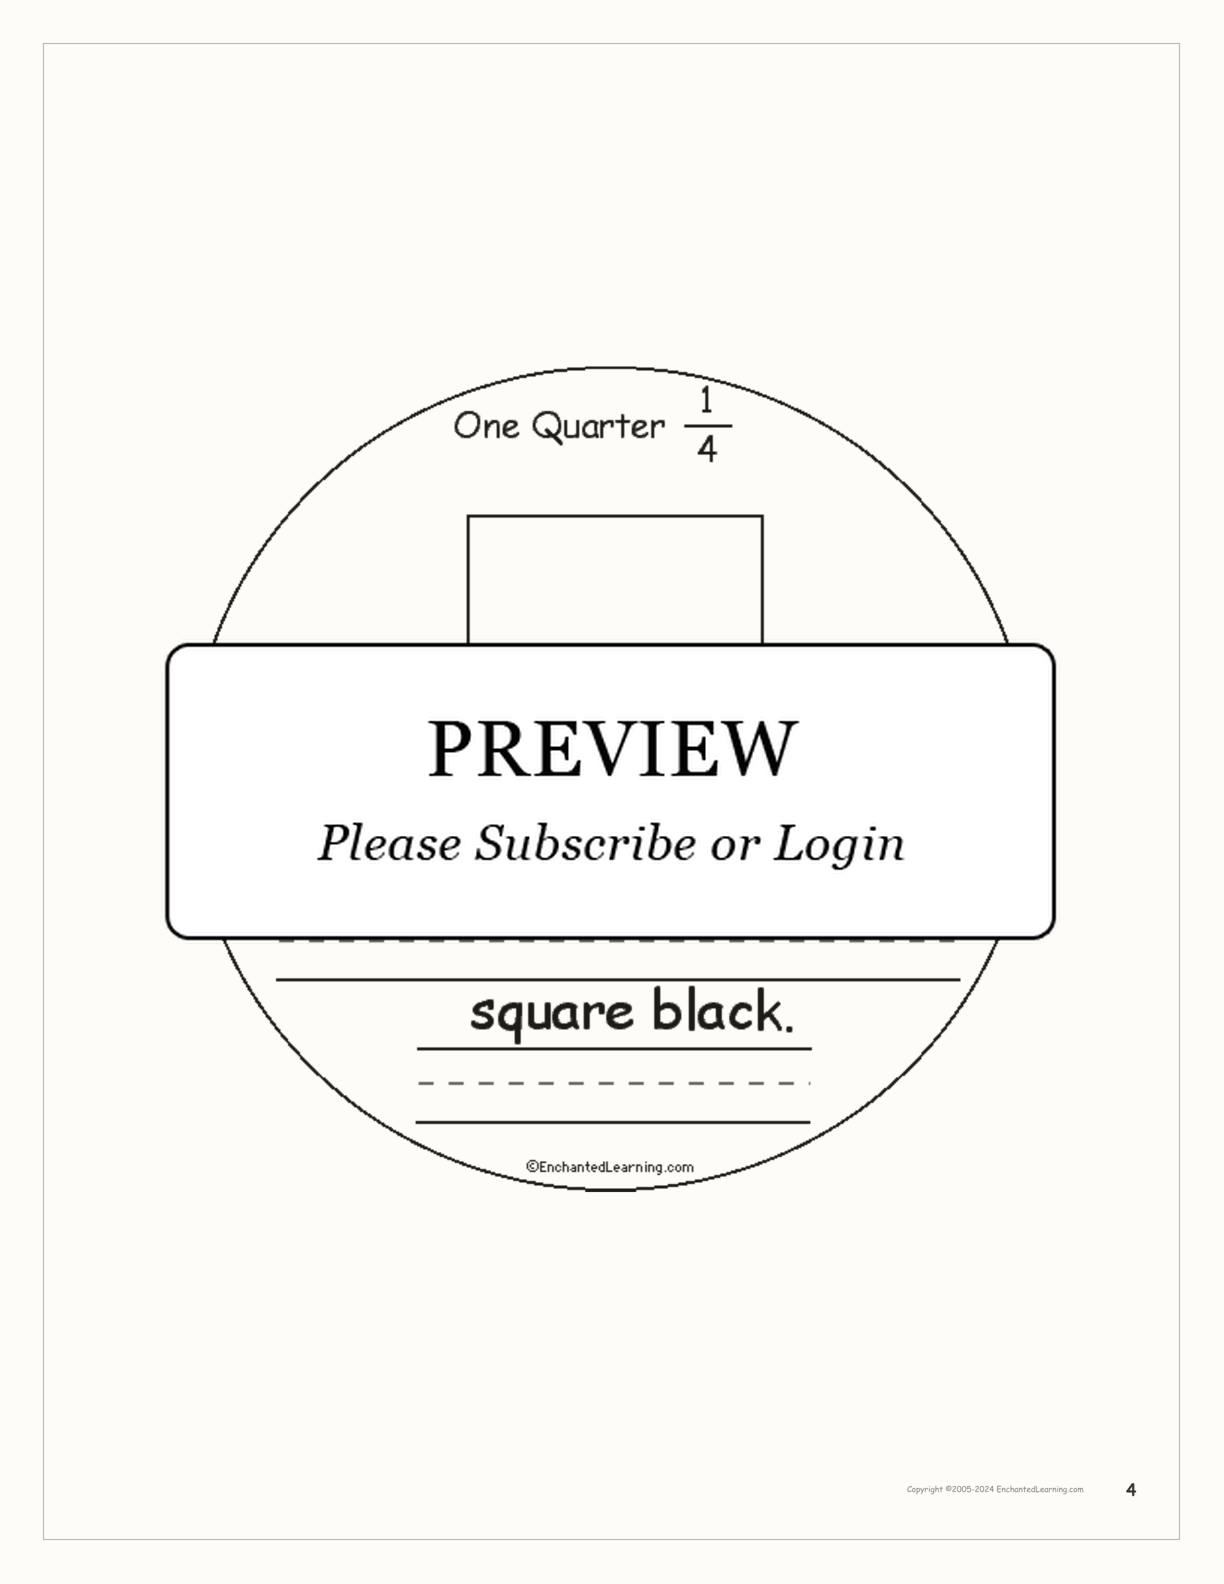 One Quarter: A Book on Fractions interactive printout page 4